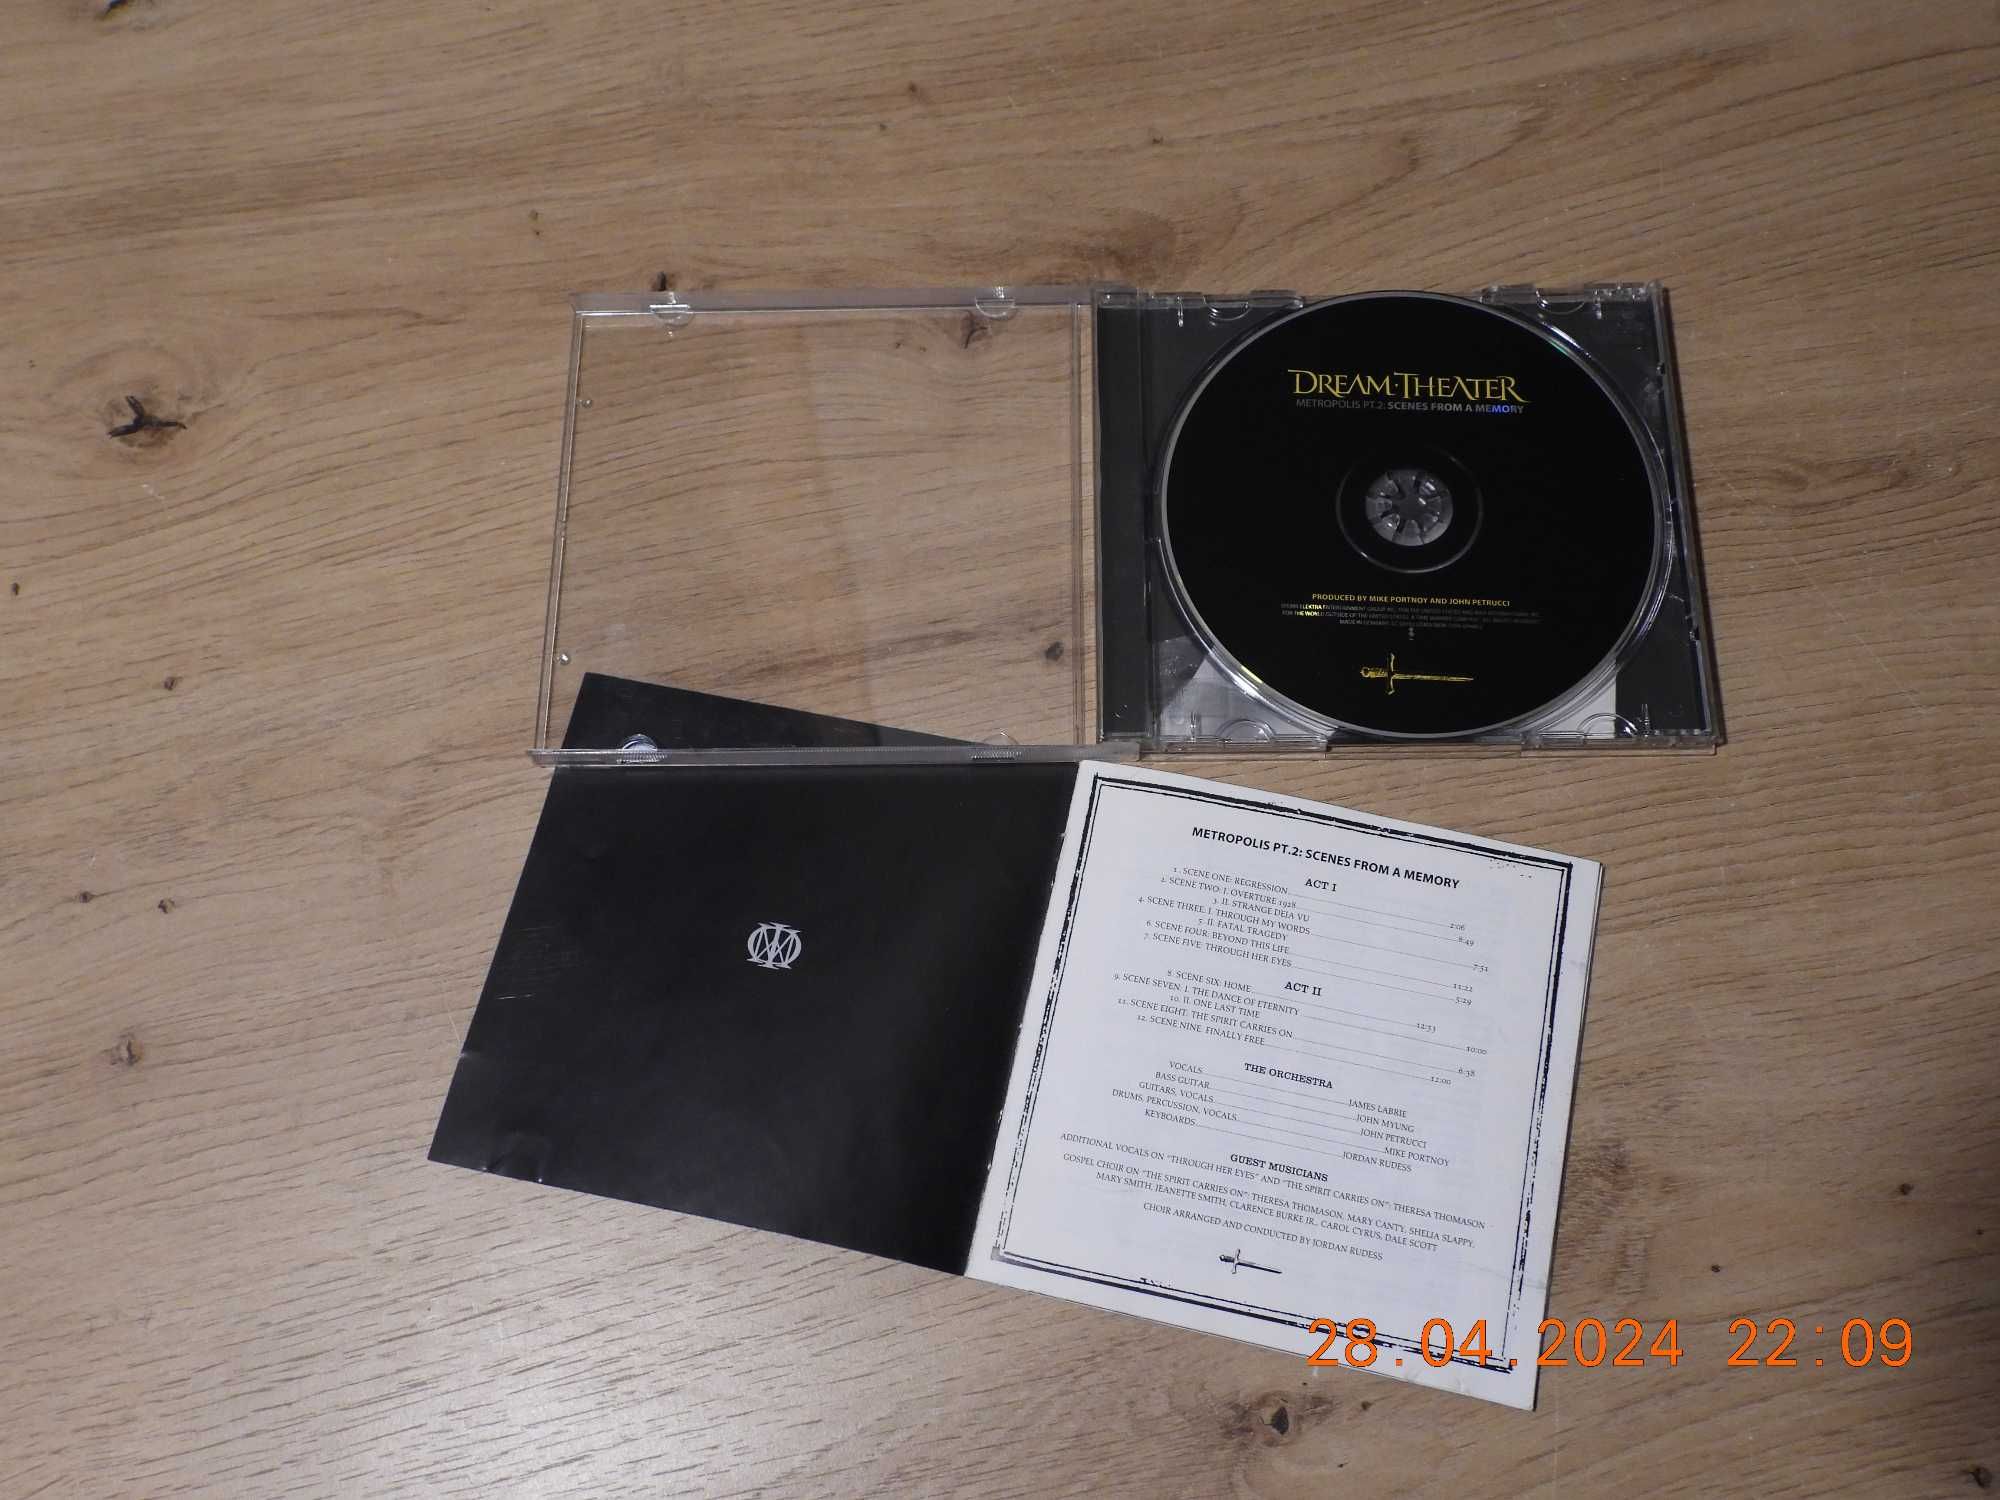 Dream Theater - Metropolis Pt. 2: Scenes From A Memory - CD